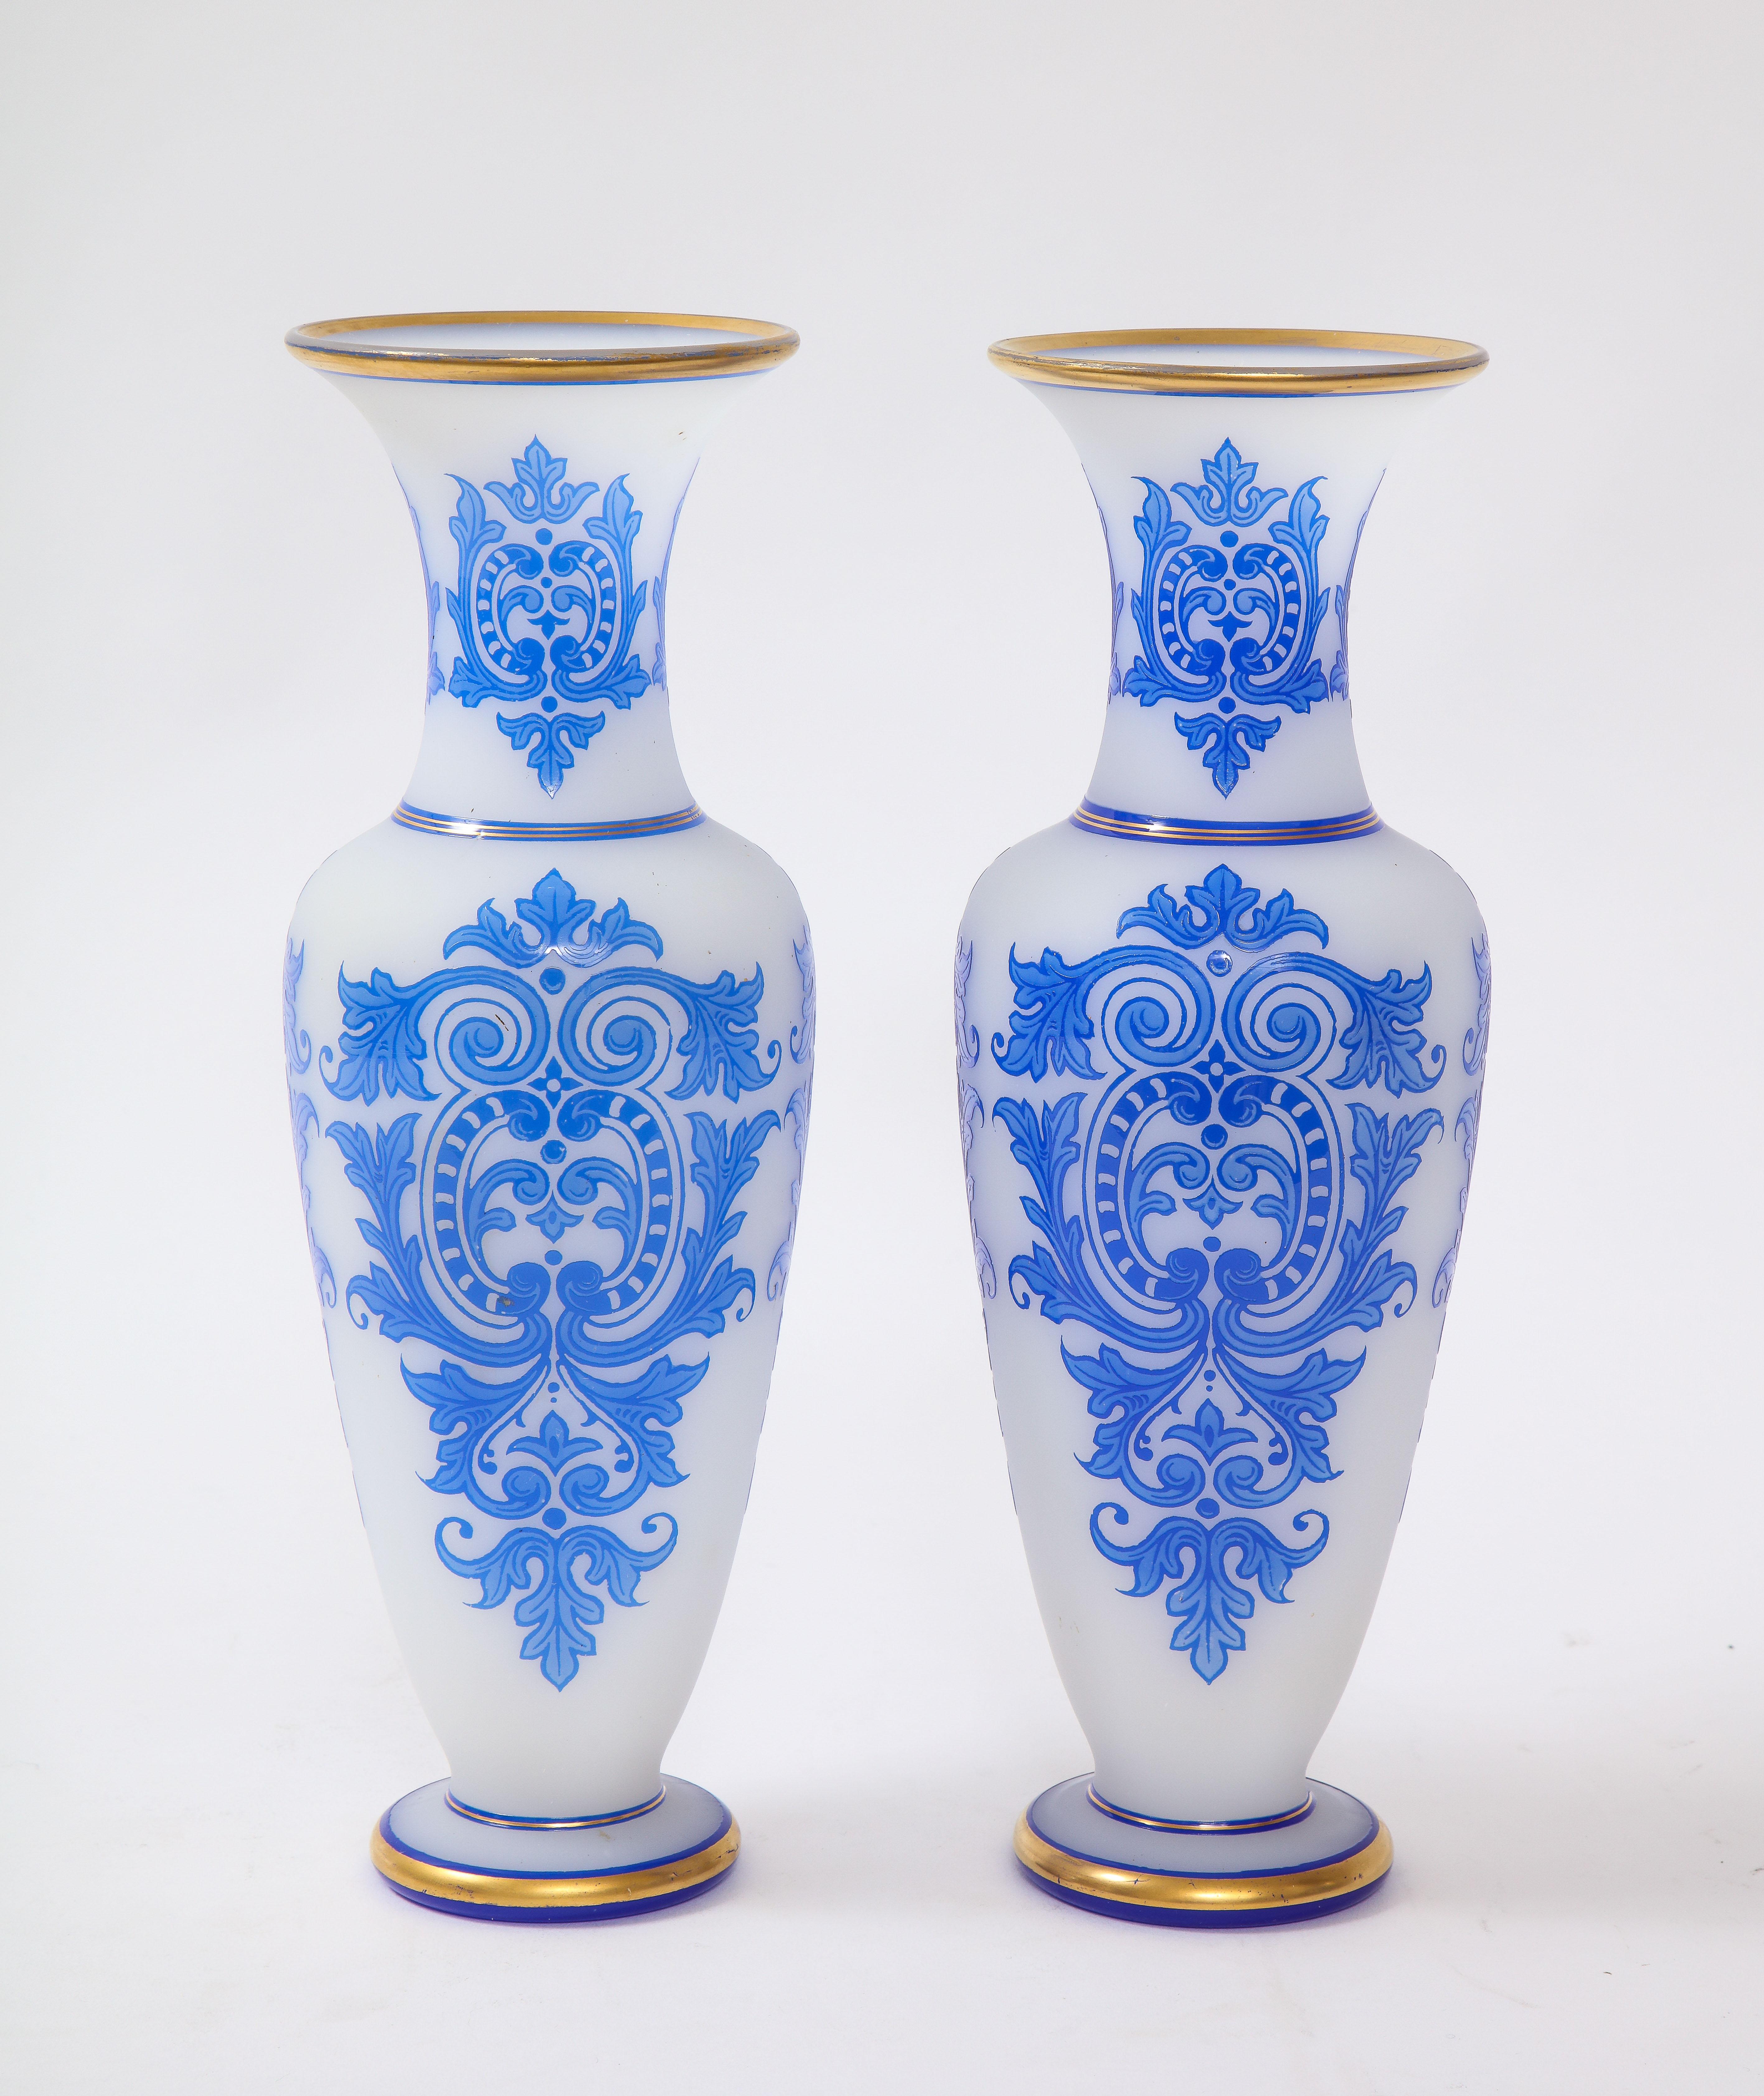 A fabulous pair of 19th Century Louis XVI style Baccarat double overlay blue over clear white opaline vases with 24k hand-painted gold decoration. Each vase is of slender form with white opalescent ground and blue crystal overlay. The white ground